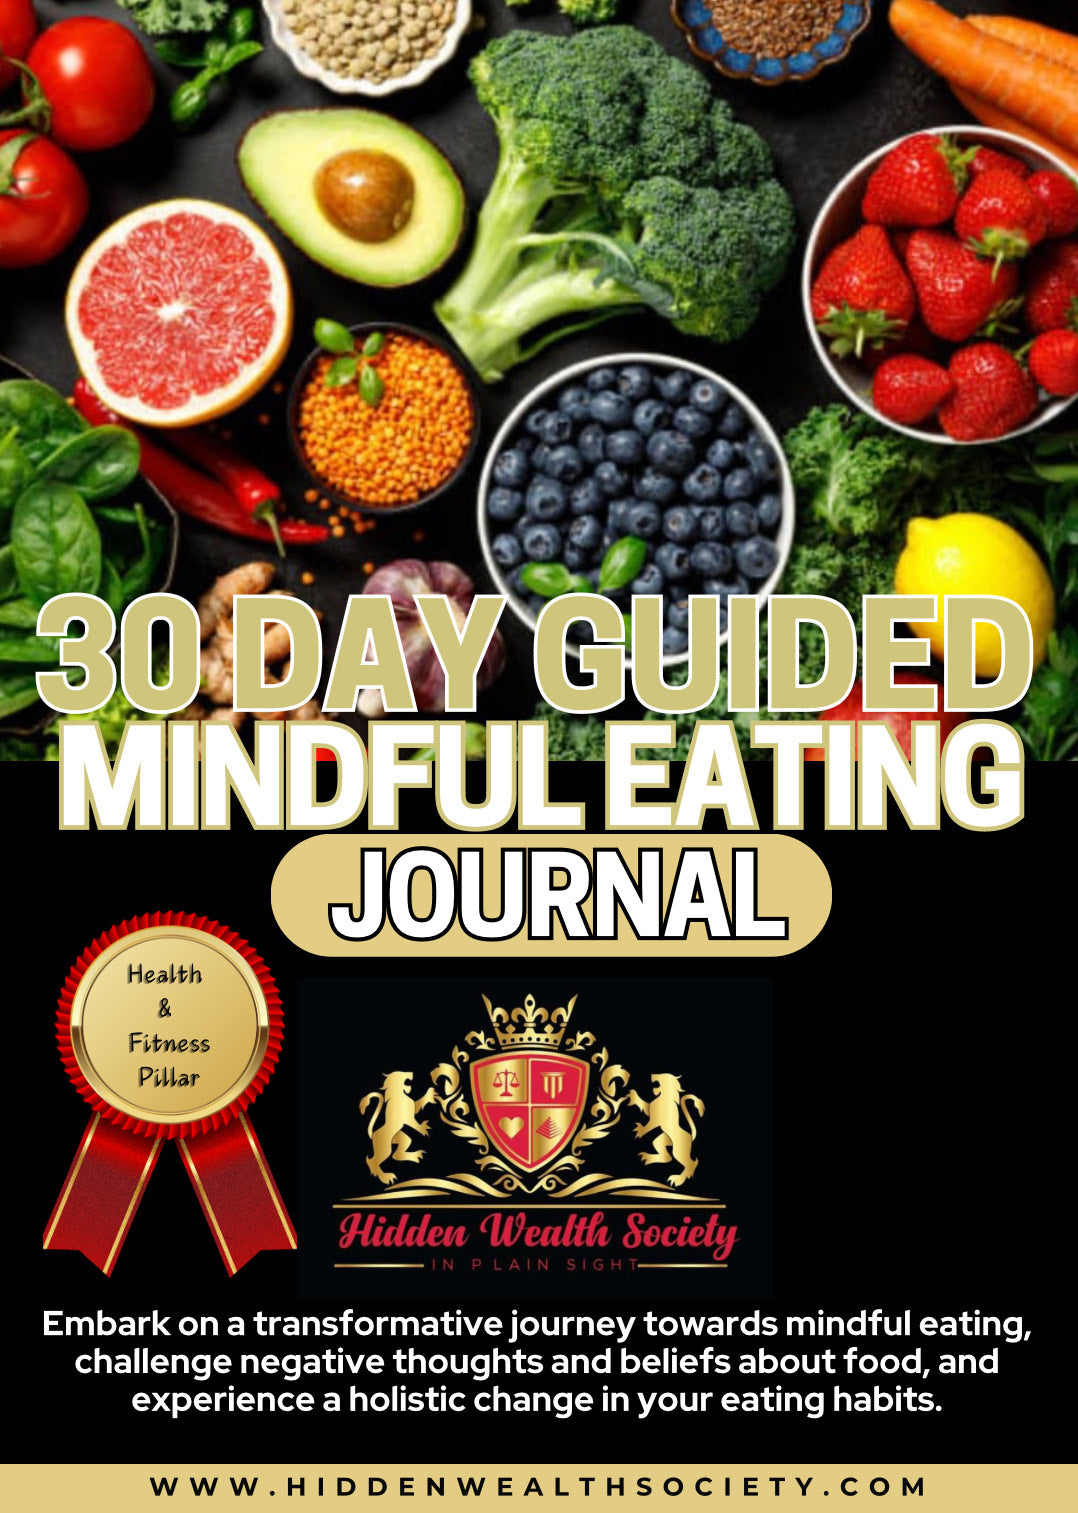 30 Day Guided Mindful Eating Journal